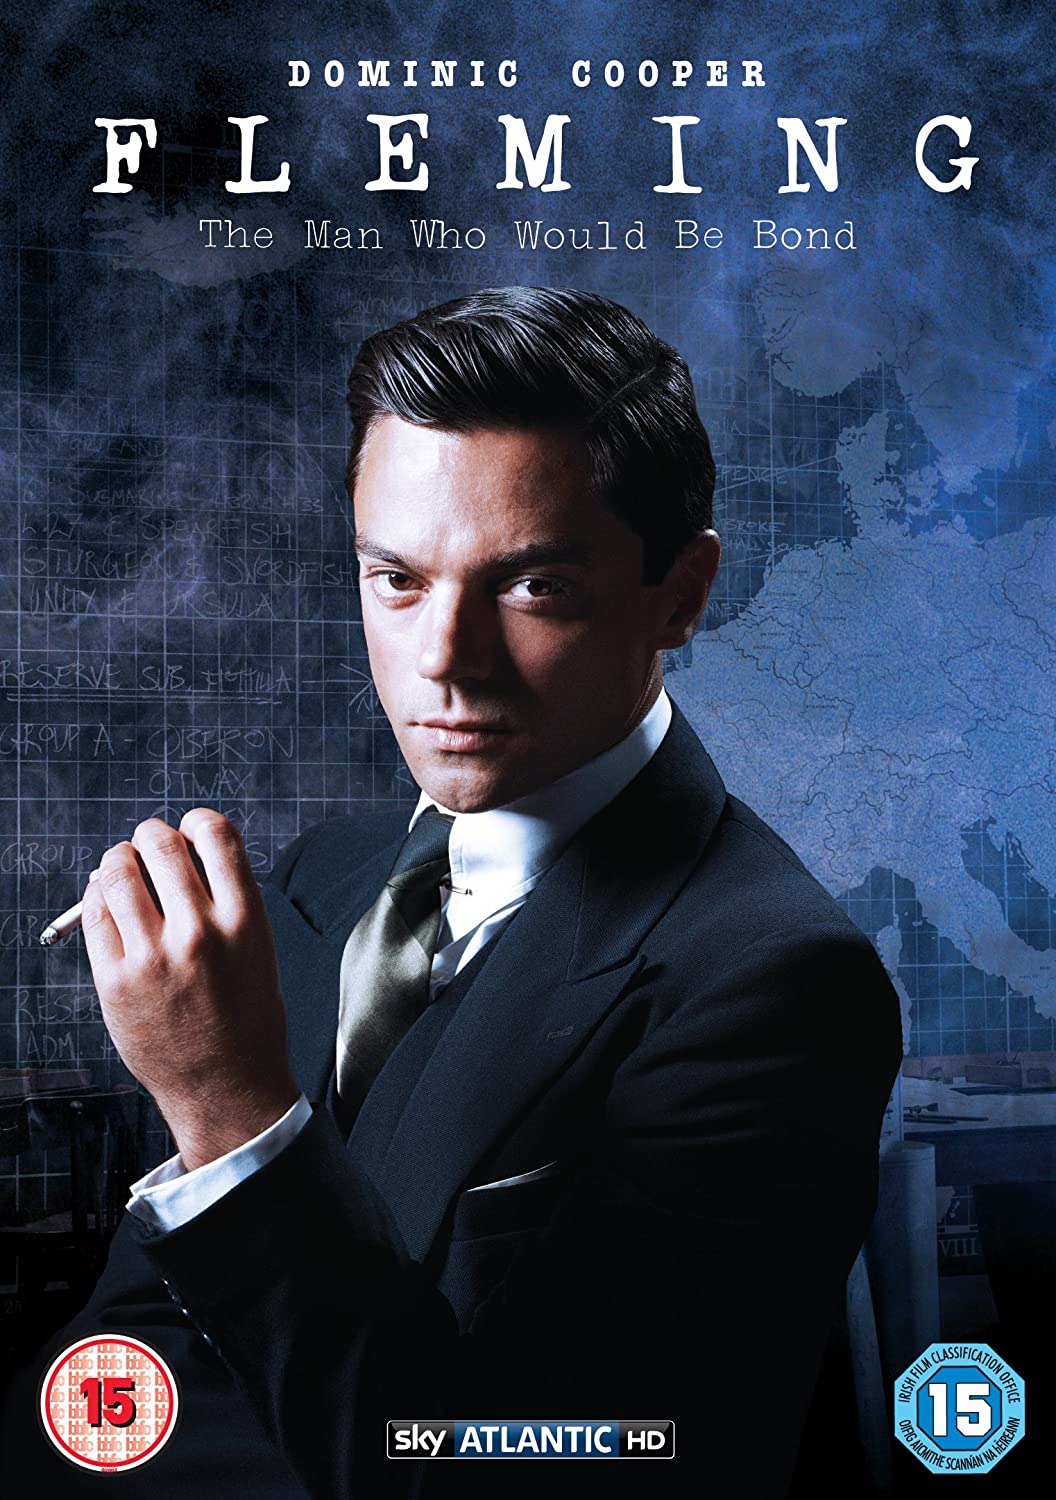 Poster phim “Fleming: The Man Who Would Be Bond” (Nguồn: Internet)